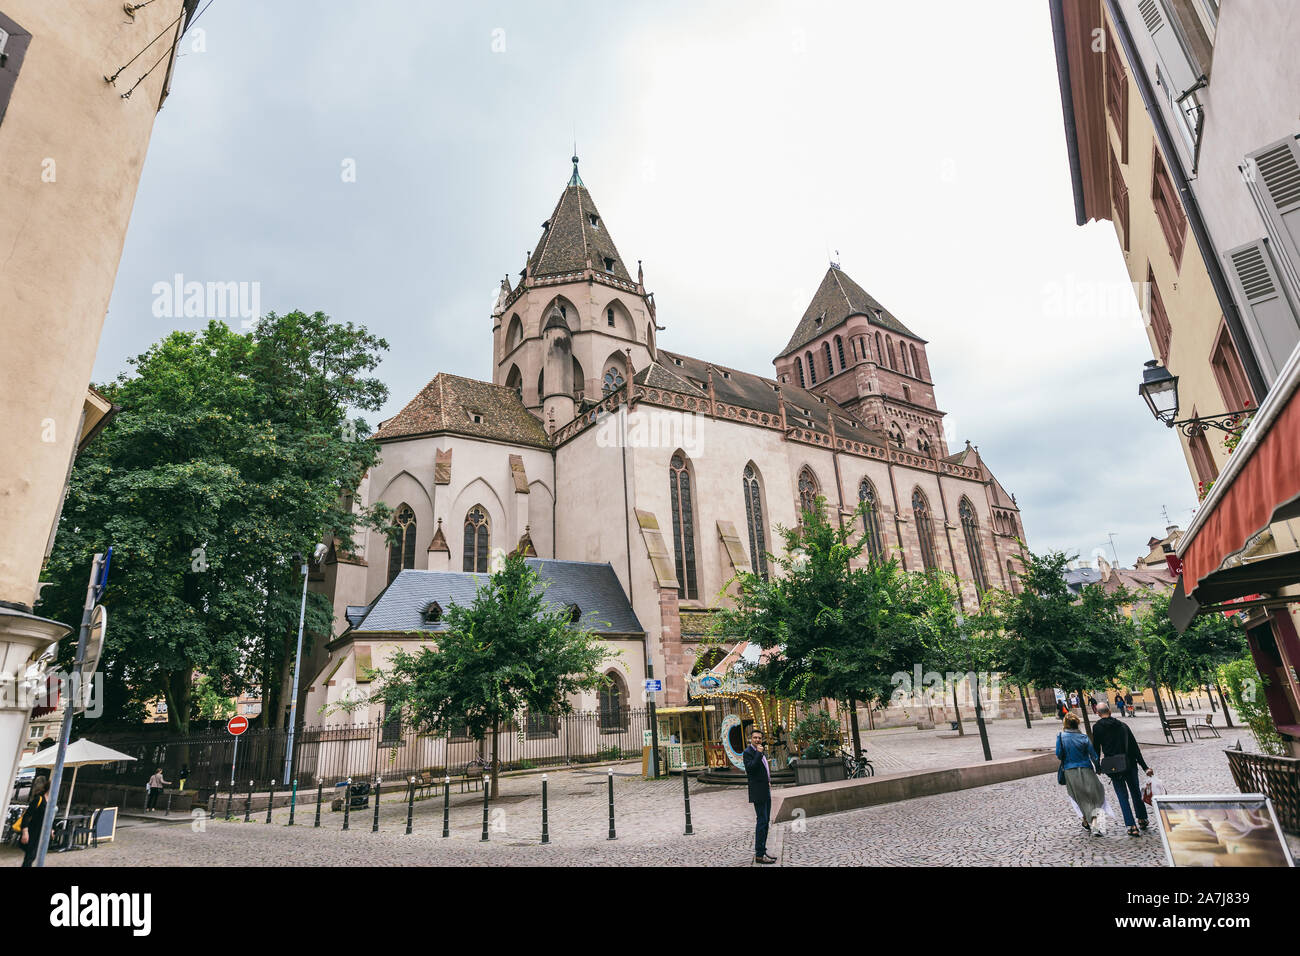 Strasbourg, France - July 26, 2017. View of the old church of St. Thomas in Strasbourg Stock Photo